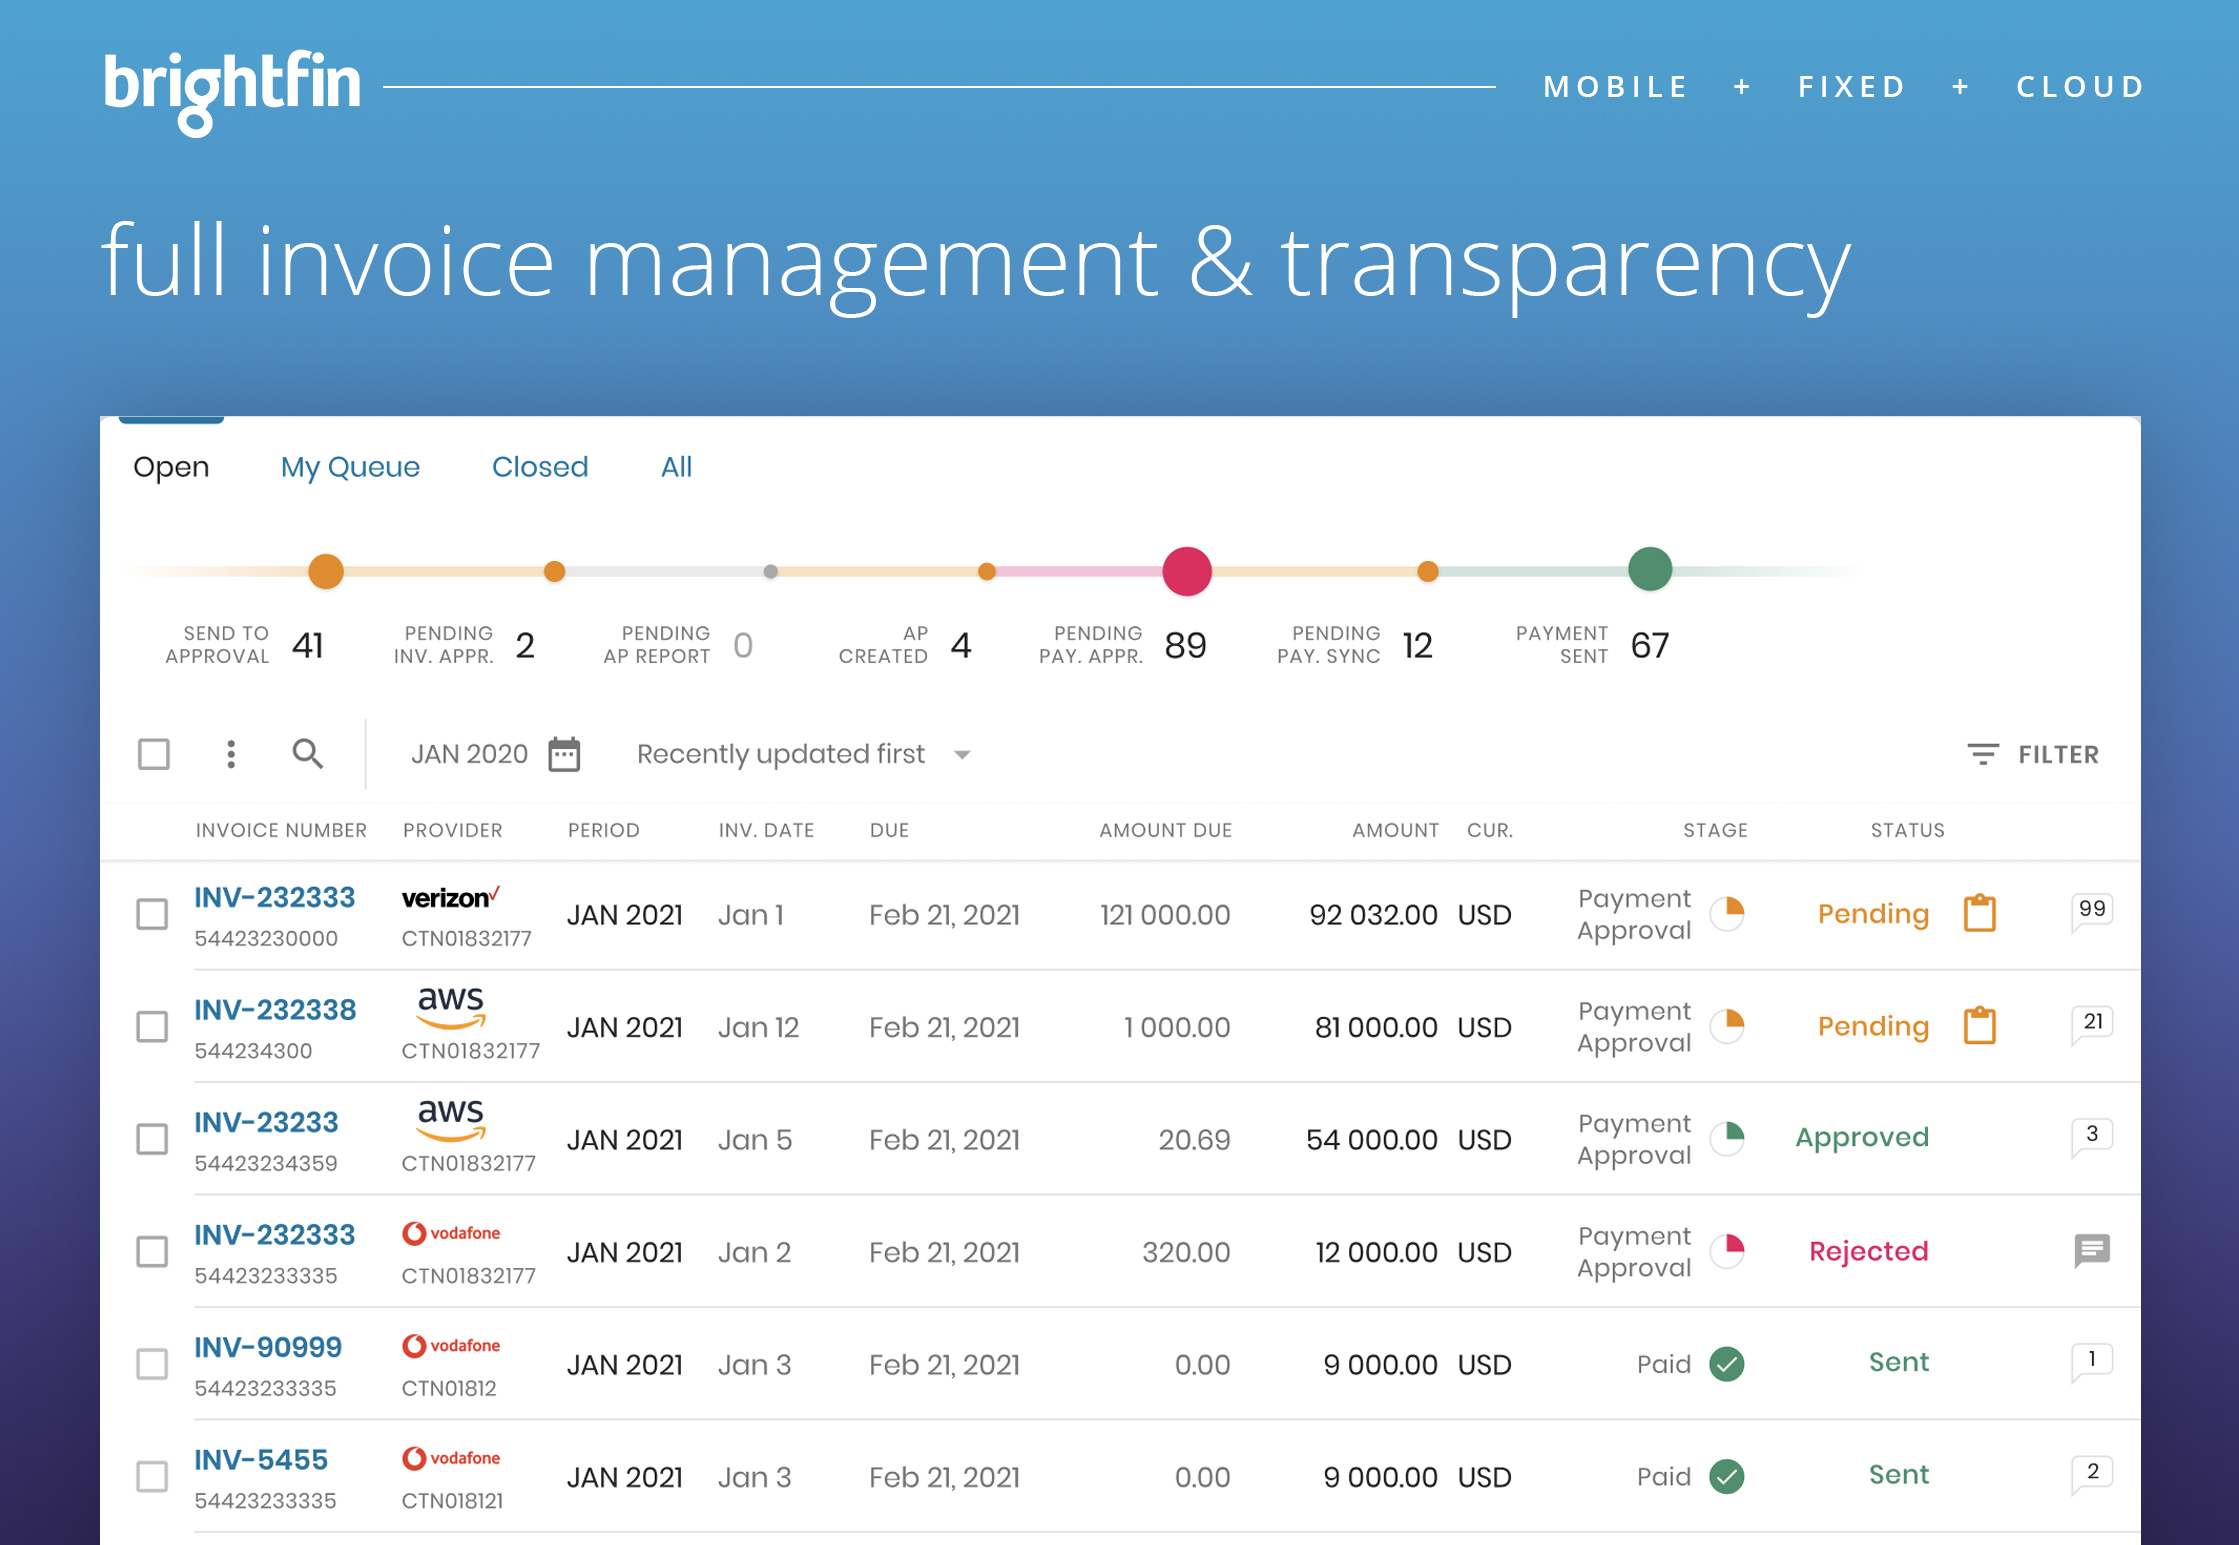 Full invoice management & transparency